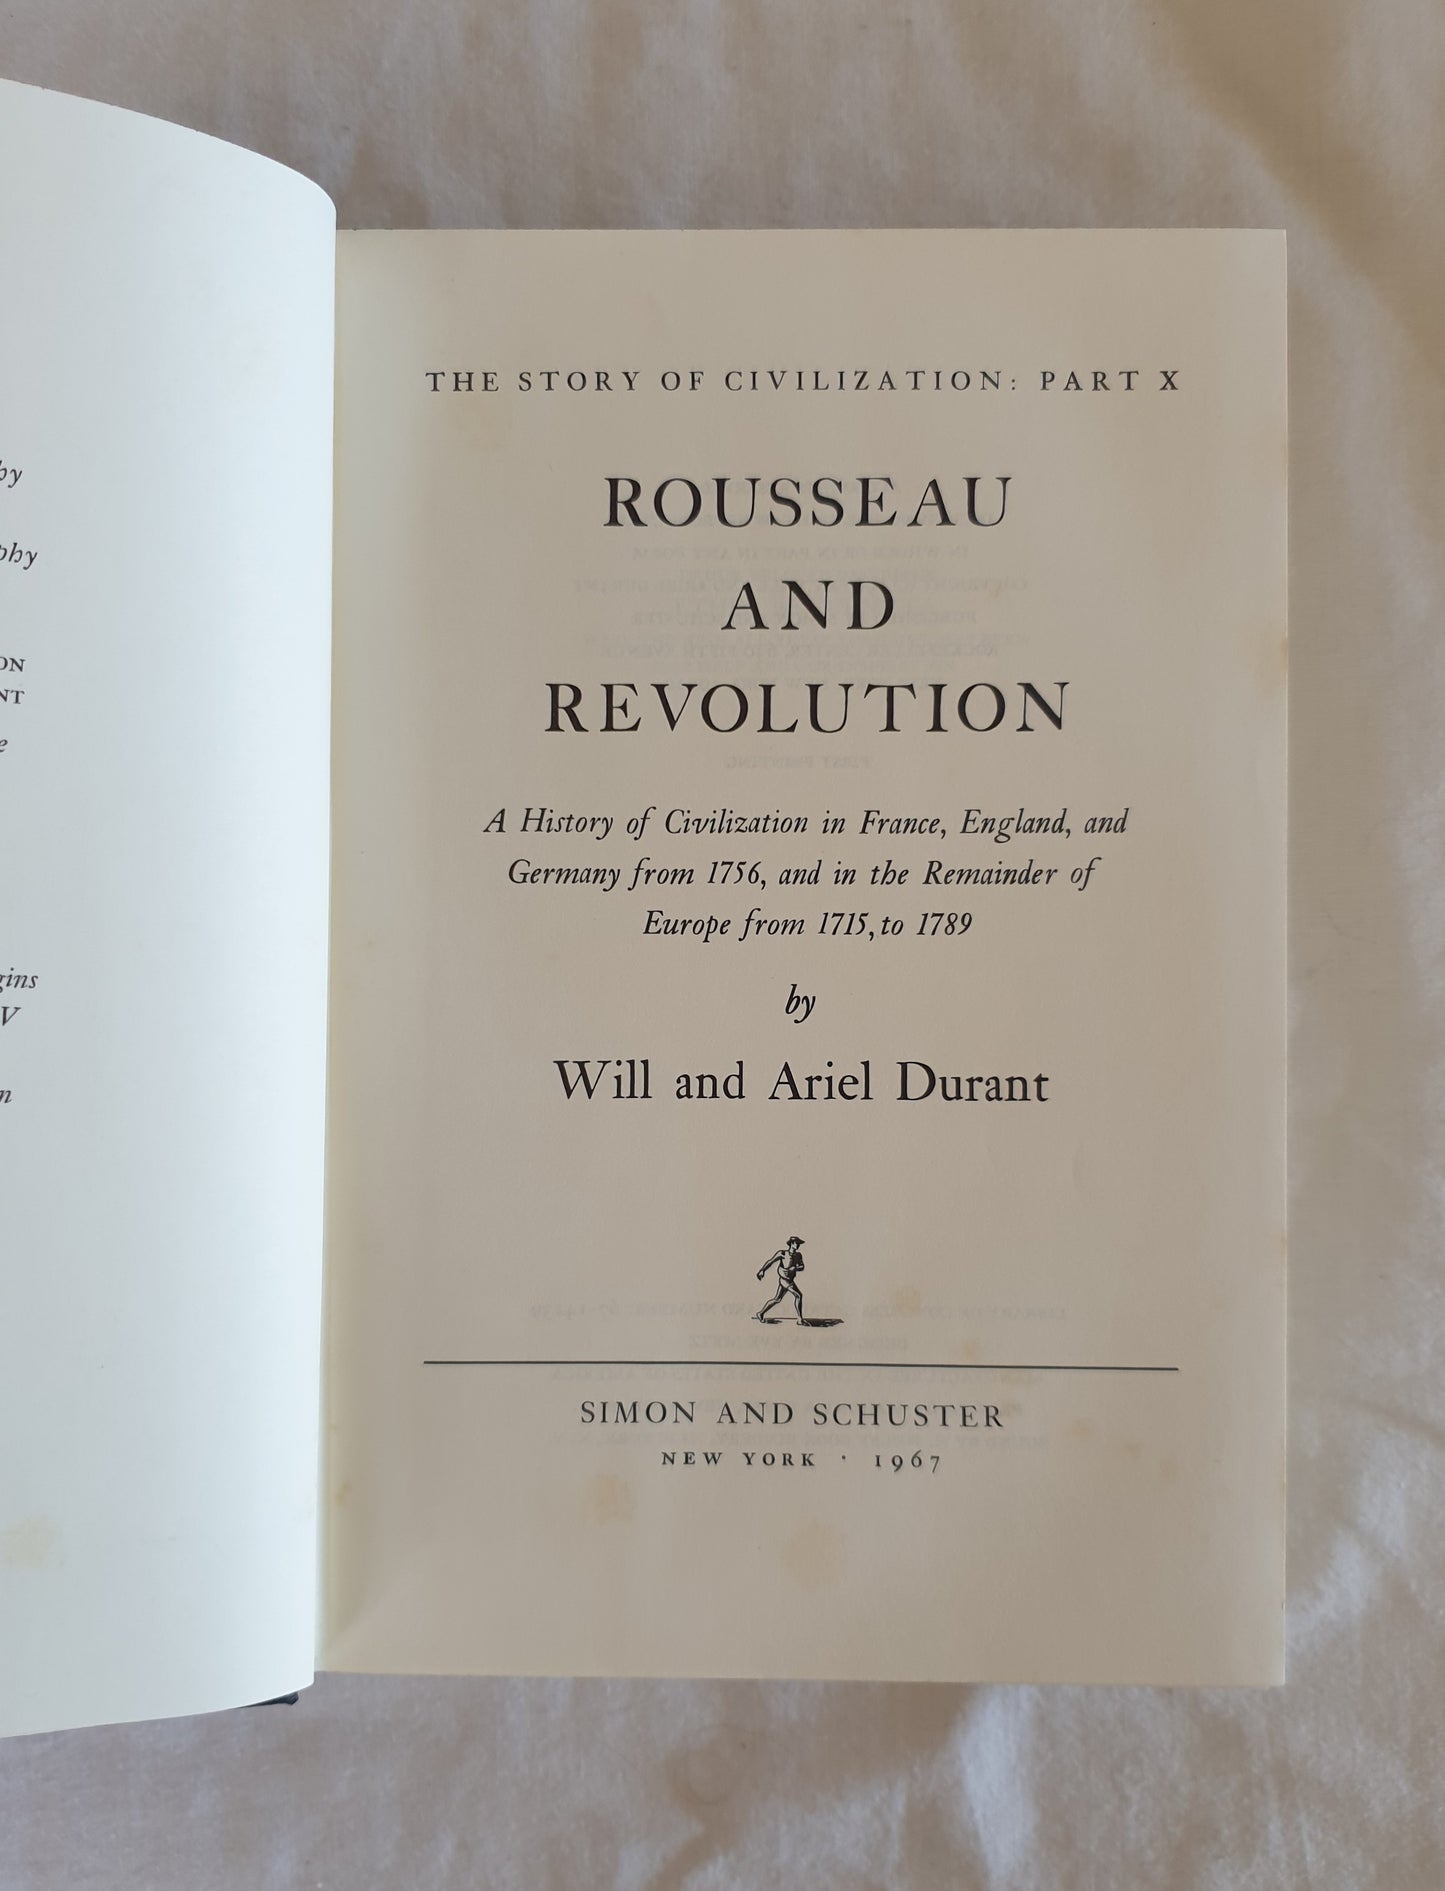 Rousseau and Revolution by Will and Ariel Durant